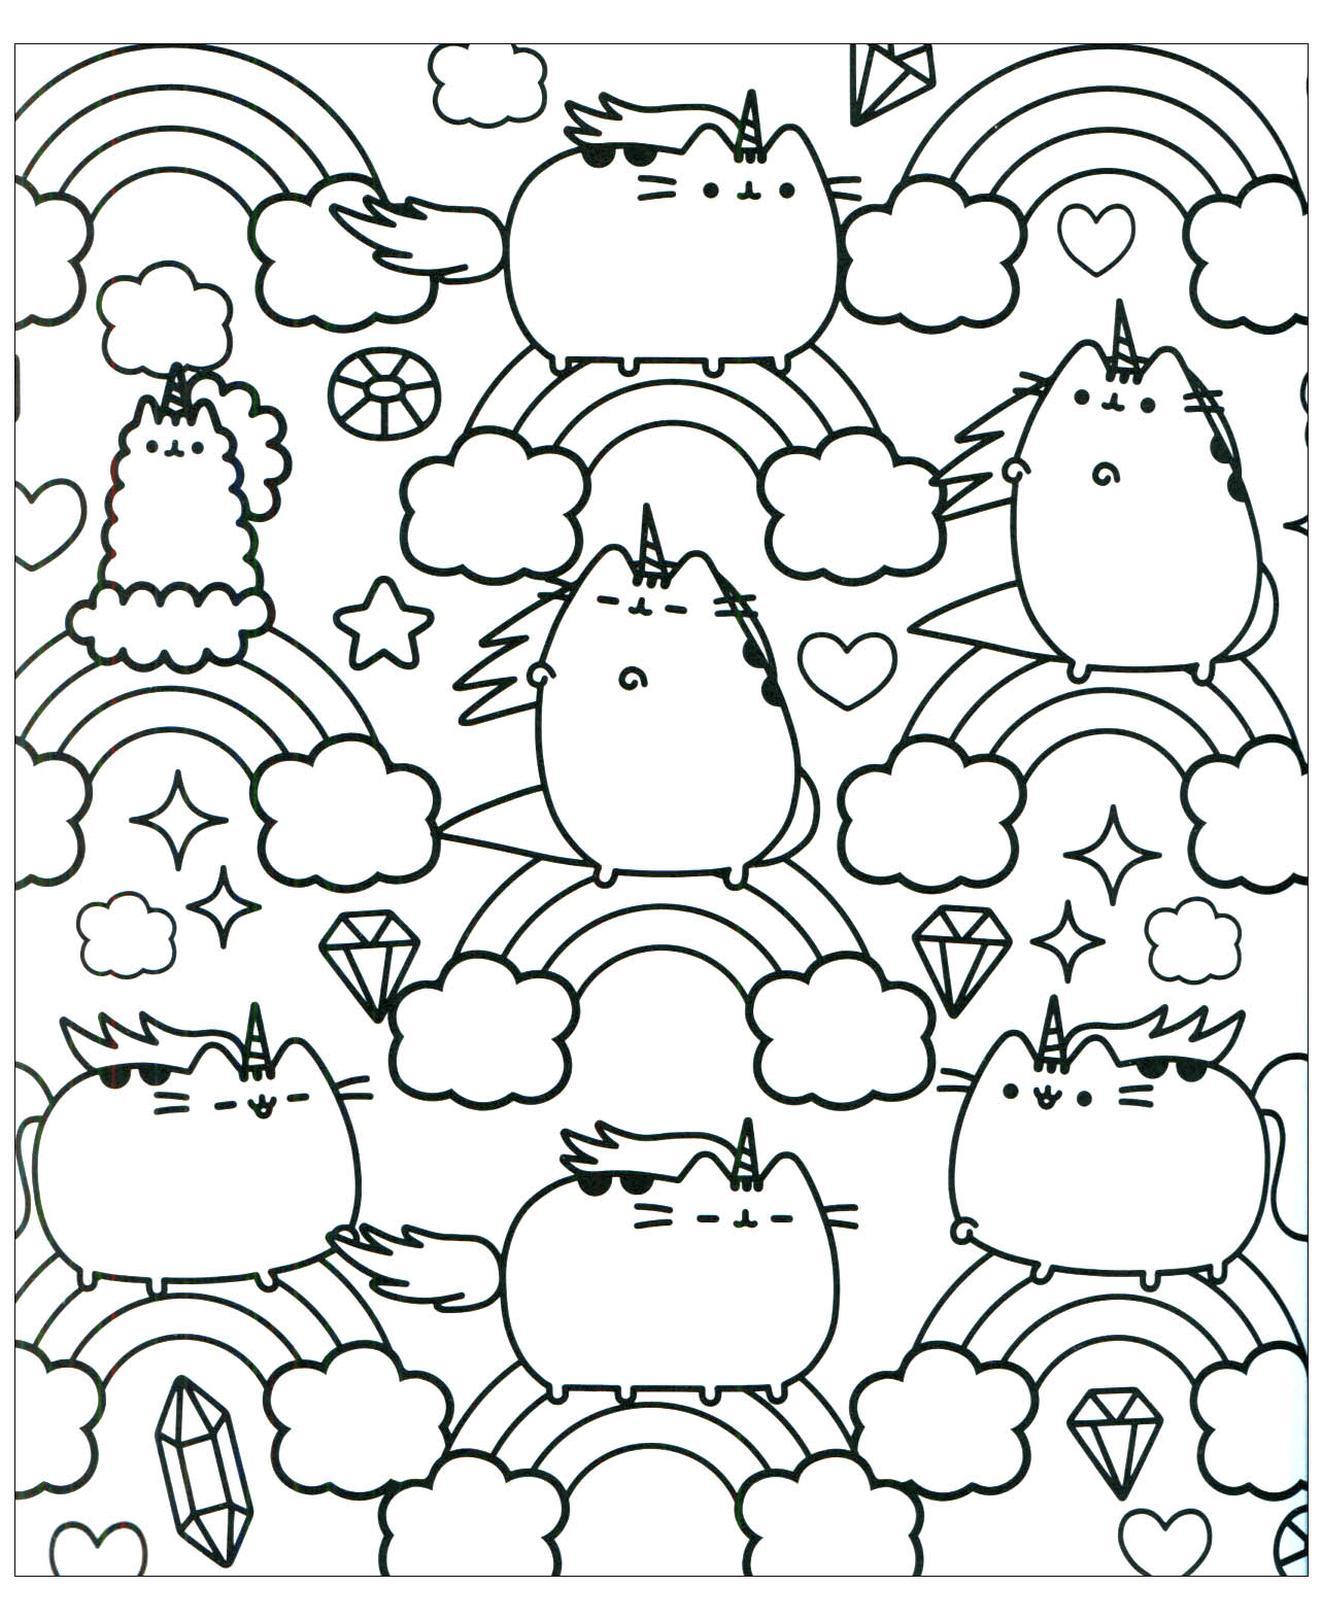 Get This Kawaii Coloring Pages Cute Pusheen Cat and Rainbow !